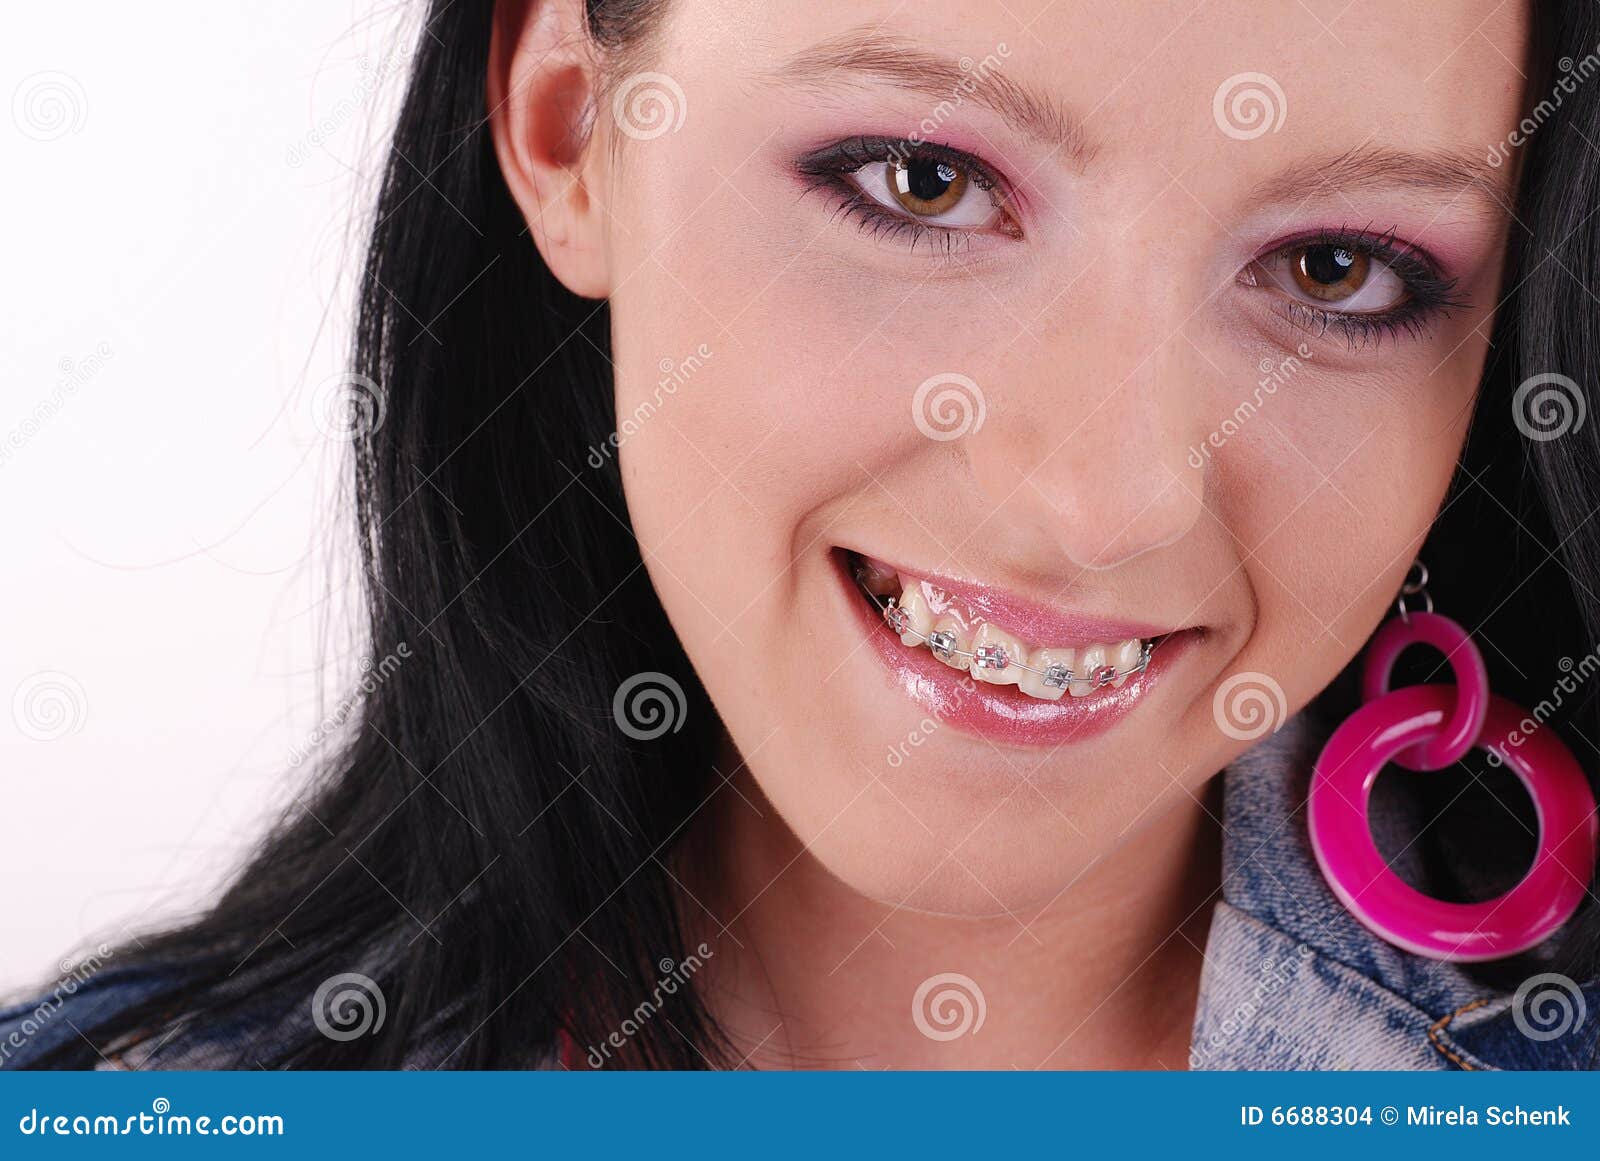 Happy Teen With Braces Stock Images Image 668